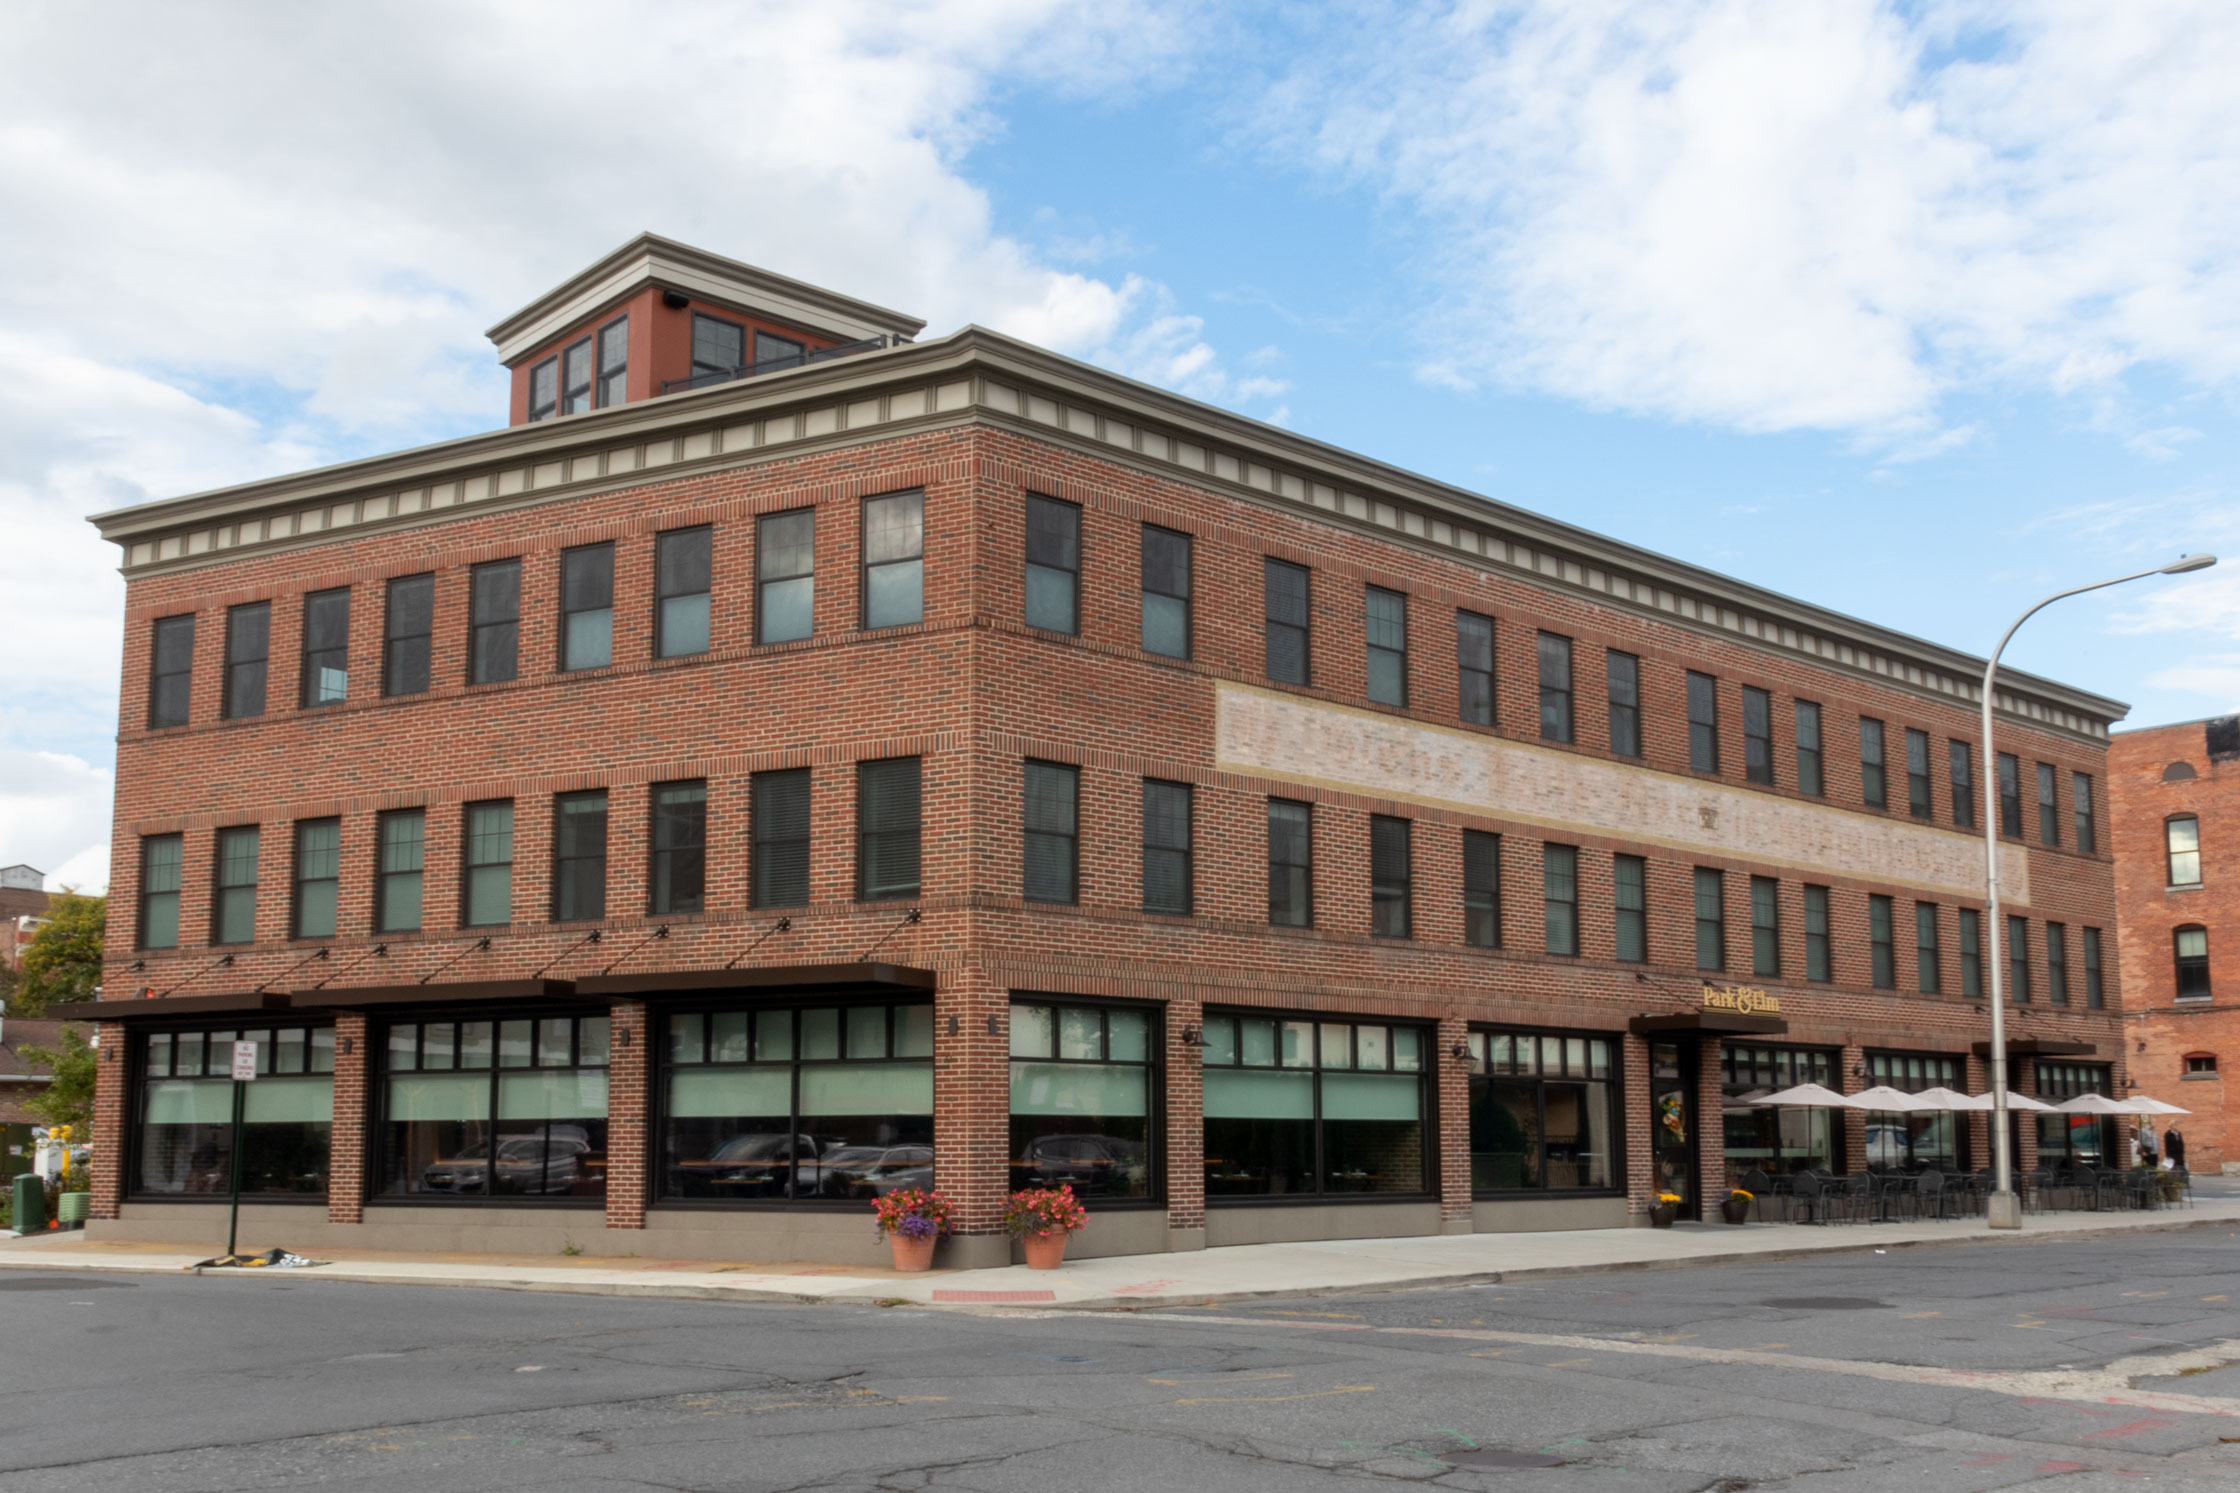 The newly renovated historic Park and Elm building in Glens Falls, New York by AJA Architecture and Planning. It includes a new cornice and elevator tower for roof access. The Elm Street side of the building has sun shad awnings to protect guests from the sun while dining. 